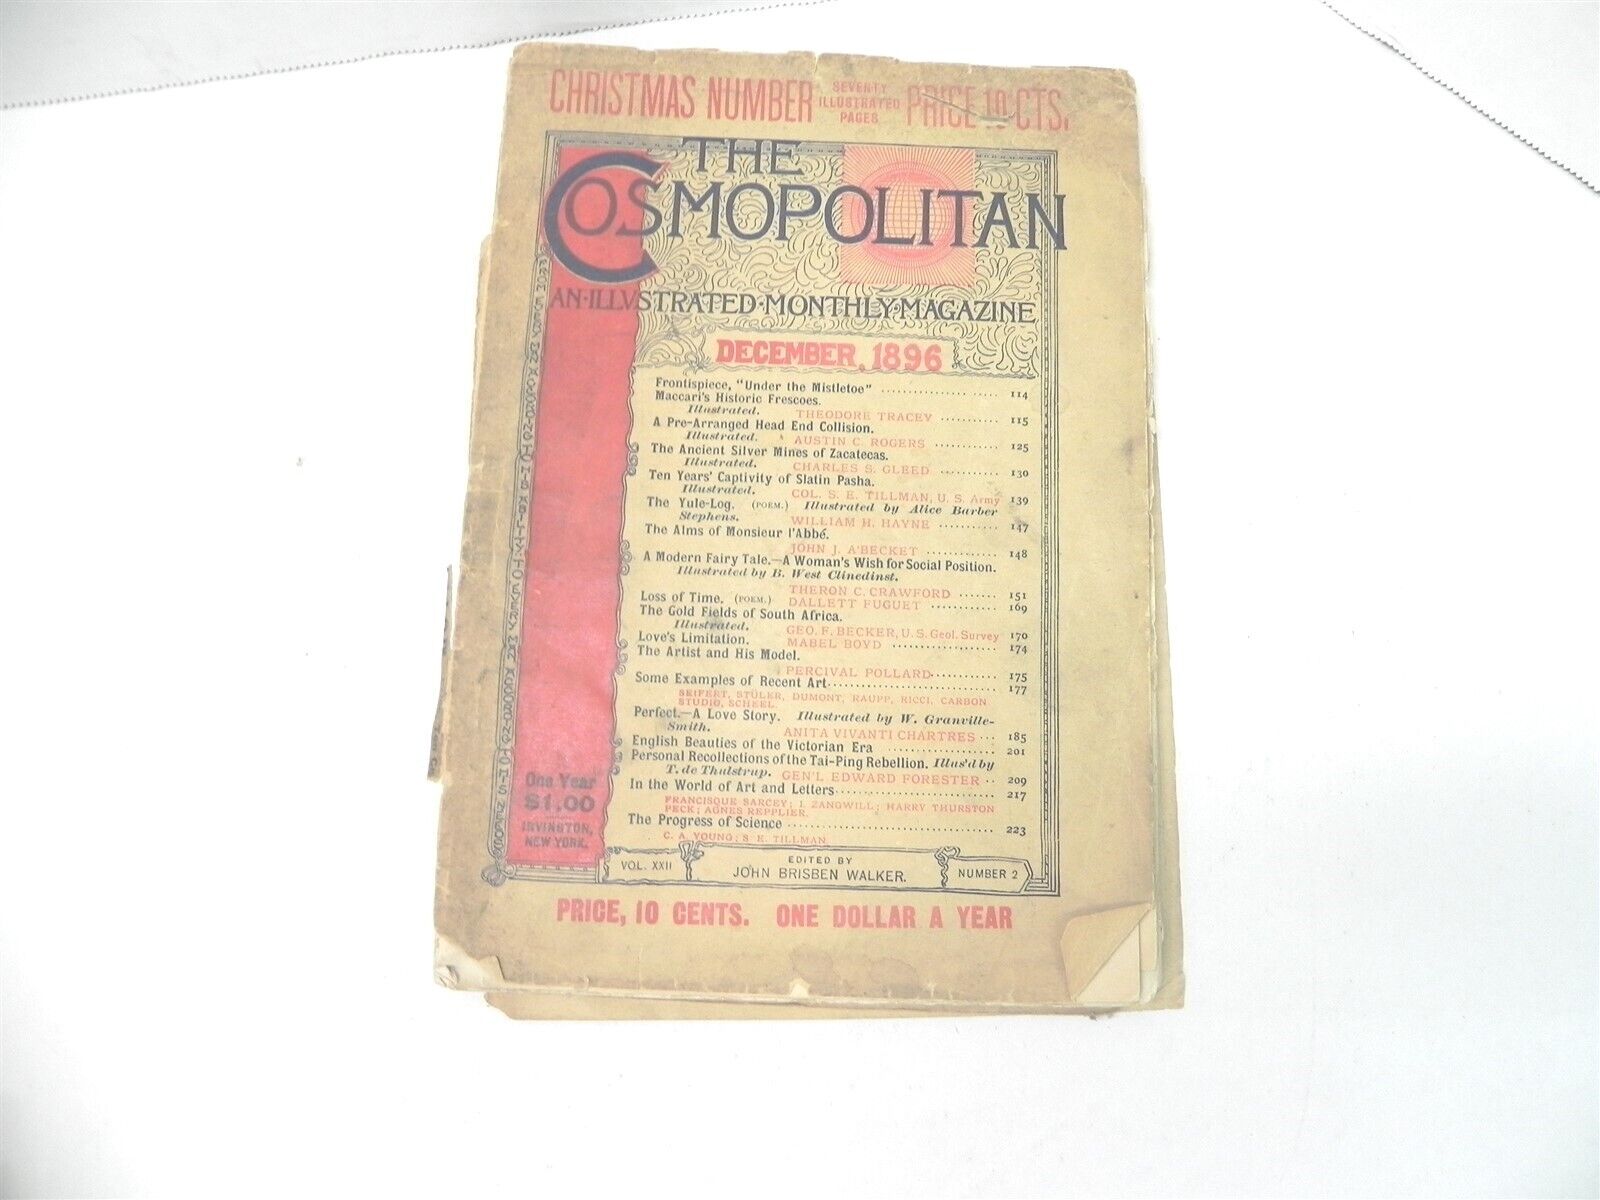 VINTAGE DECEMBER 1896 THE COSMOPOLITAN MAGAZINE AN ILLUSTRADED MONTHLY LIFESTYLE